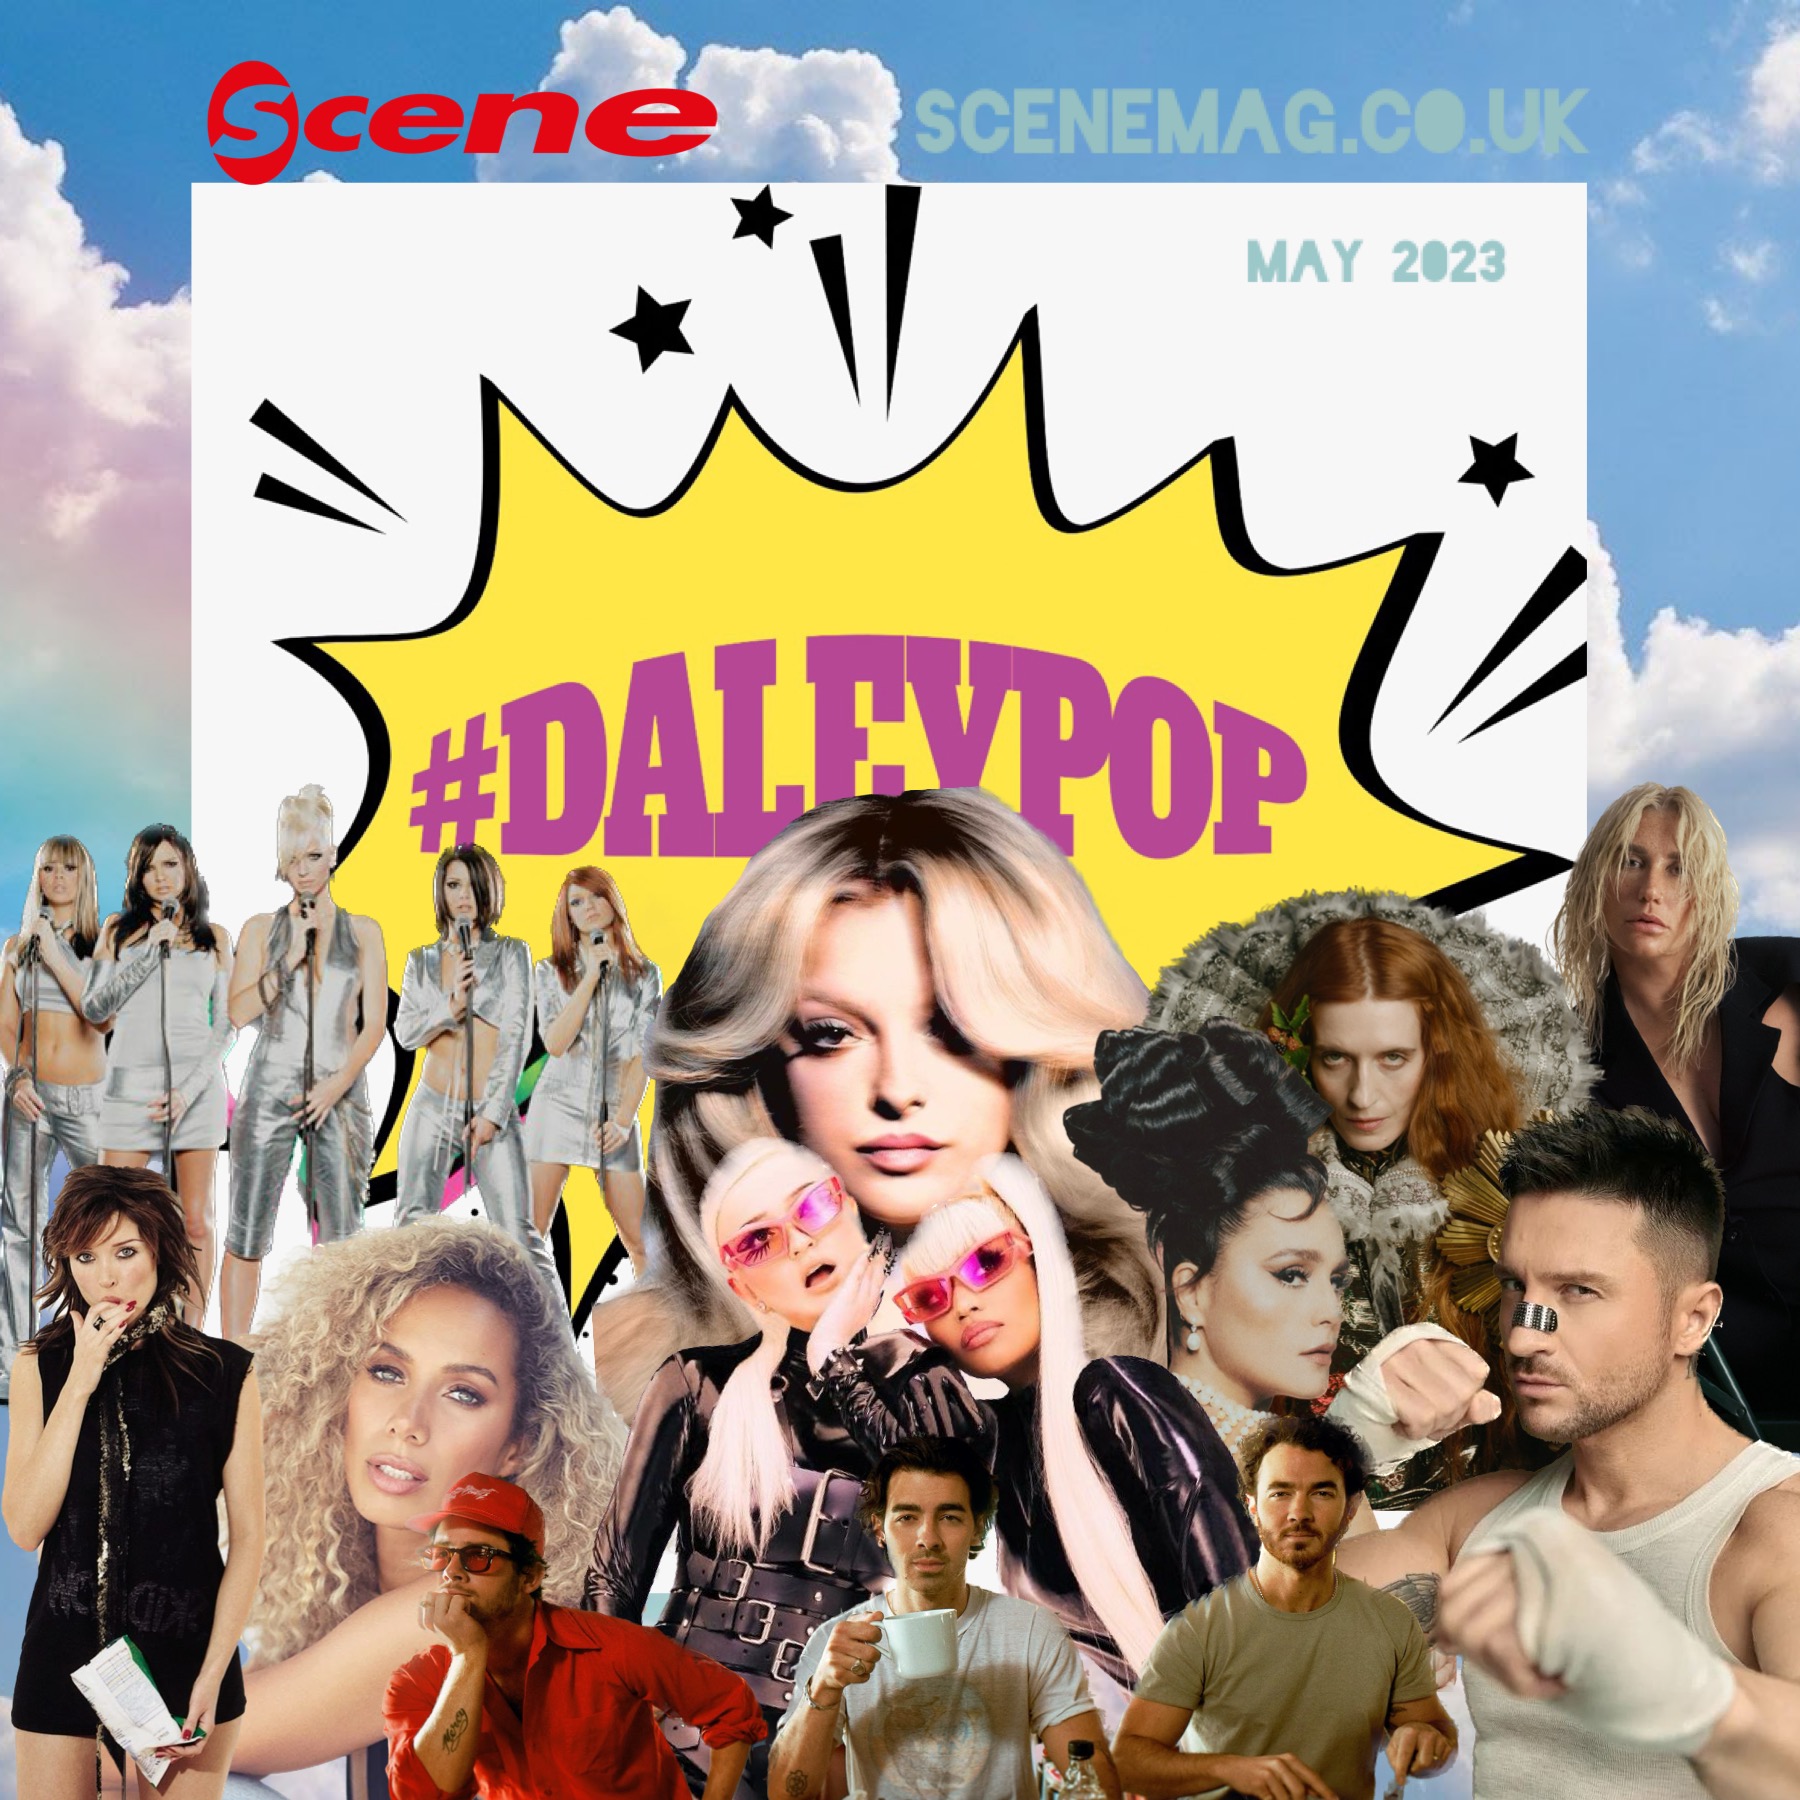 Woo-ah! #DaleyPOP is here🫶🏻featuring Kim Petras, Girls Aloud, Bebe Rexha and more!